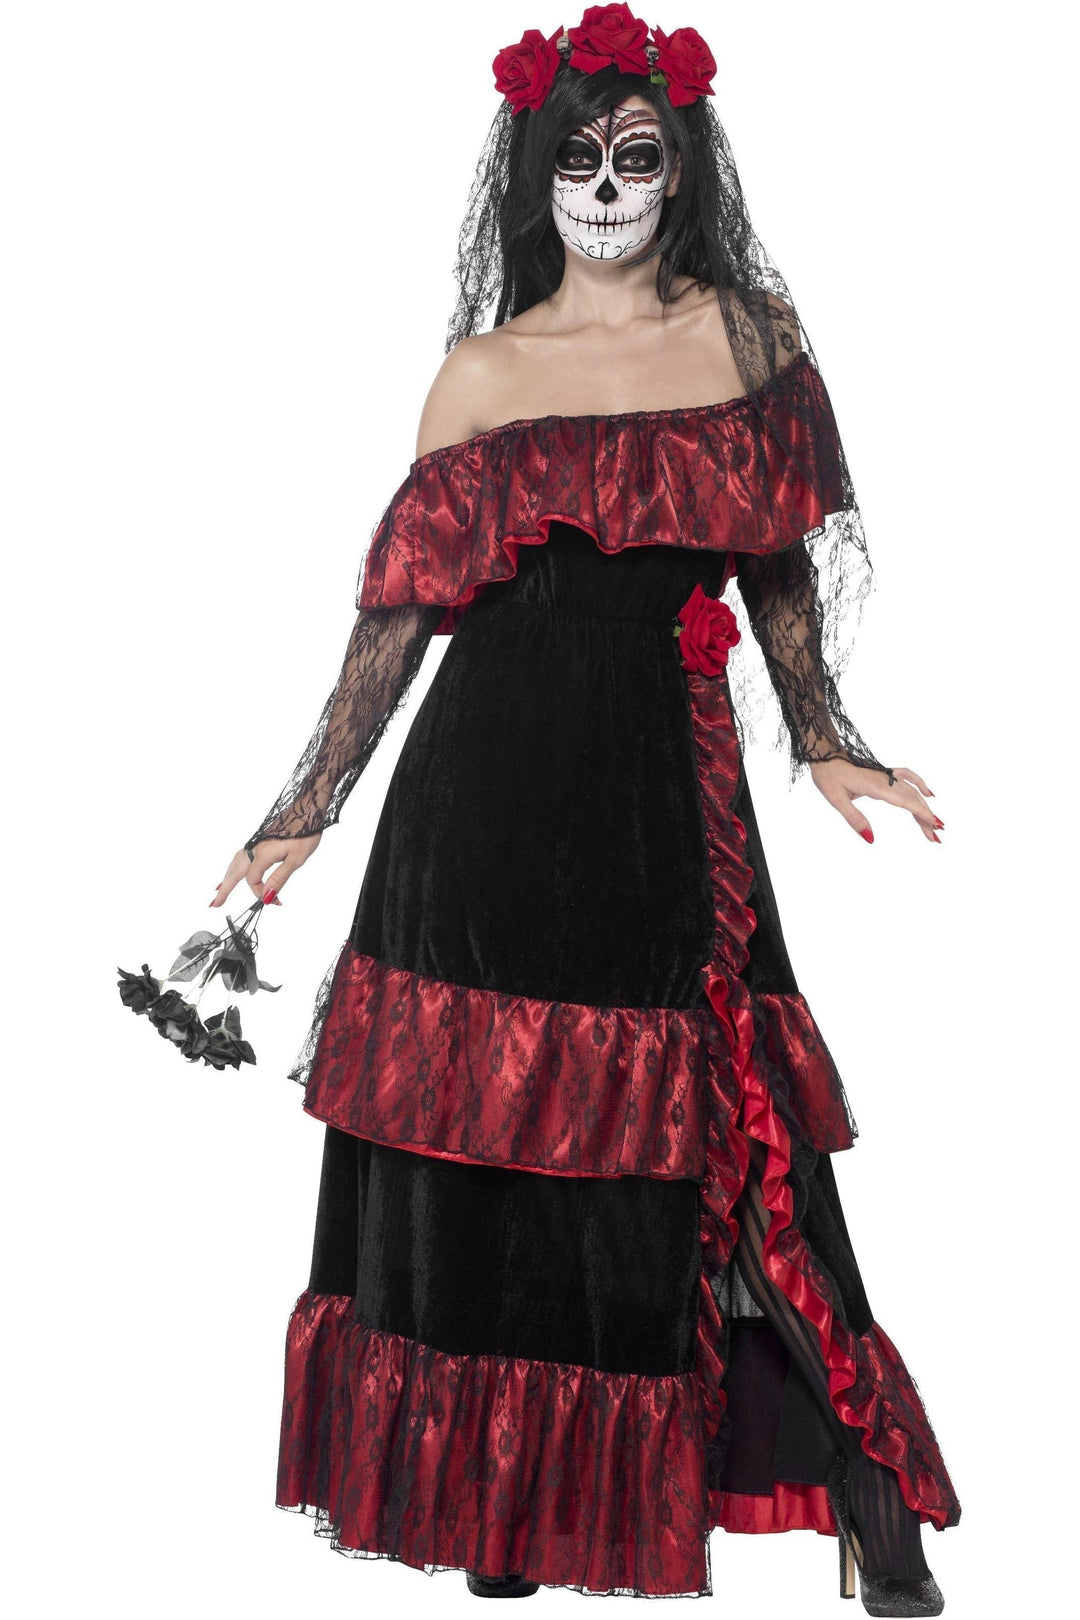 https://www.sexyshoes.com/cdn/shop/files/Deluxe-Day-of-the-Dead-Bride-Costume-Zombie-Costumes-Smiffy-Black-SEXYSHOES_COM.jpg?v=1695539857&width=1080